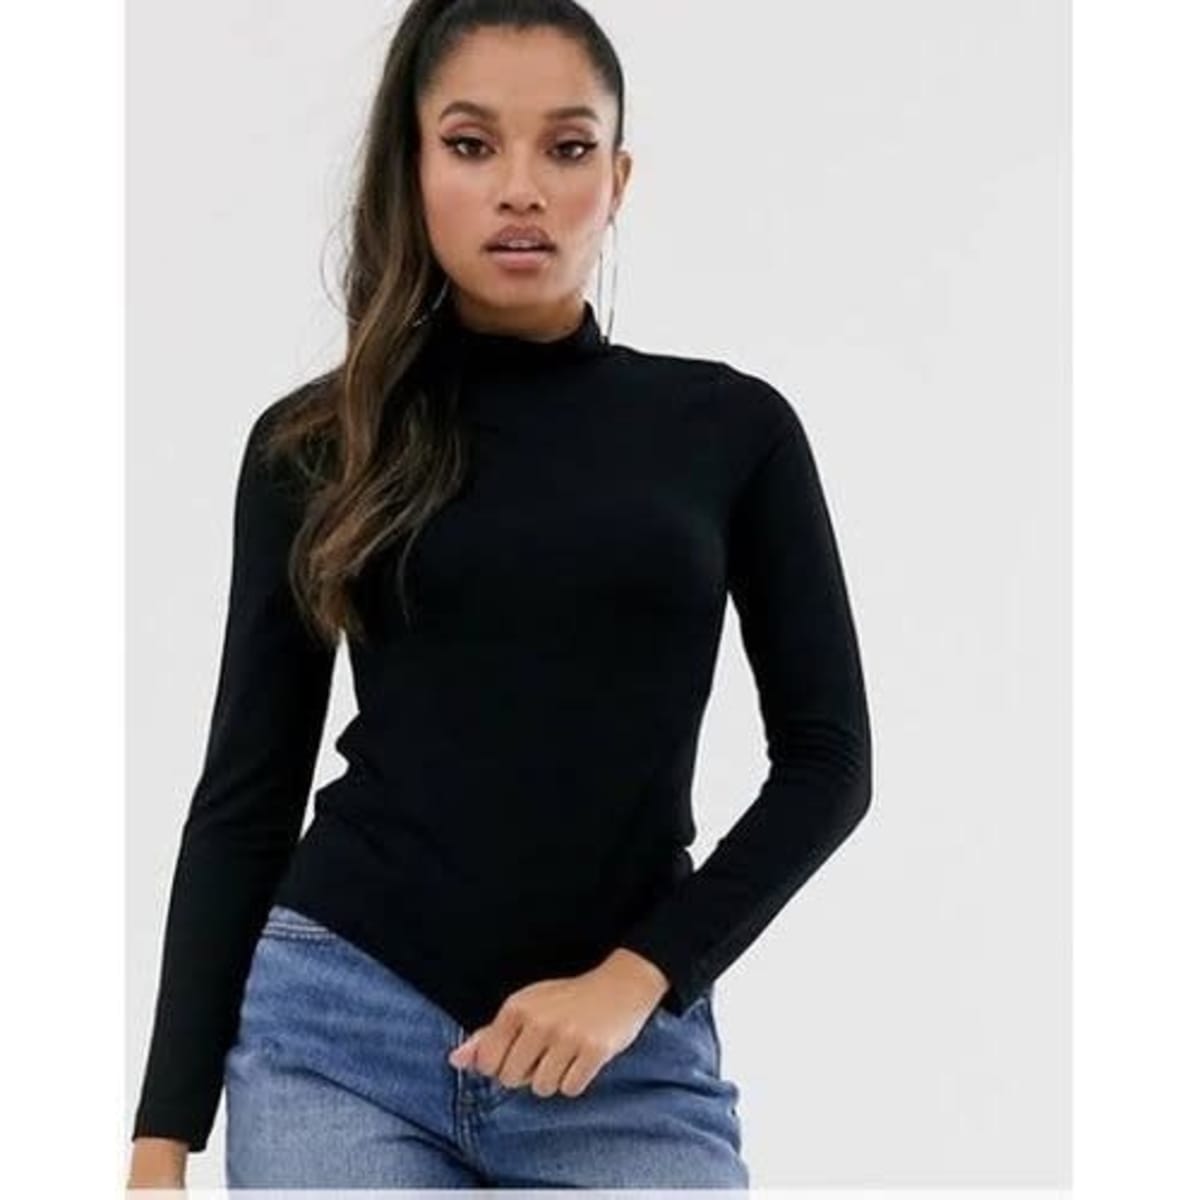 T-Shirts, Turtle Neck Long-Sleeved T-Shirt